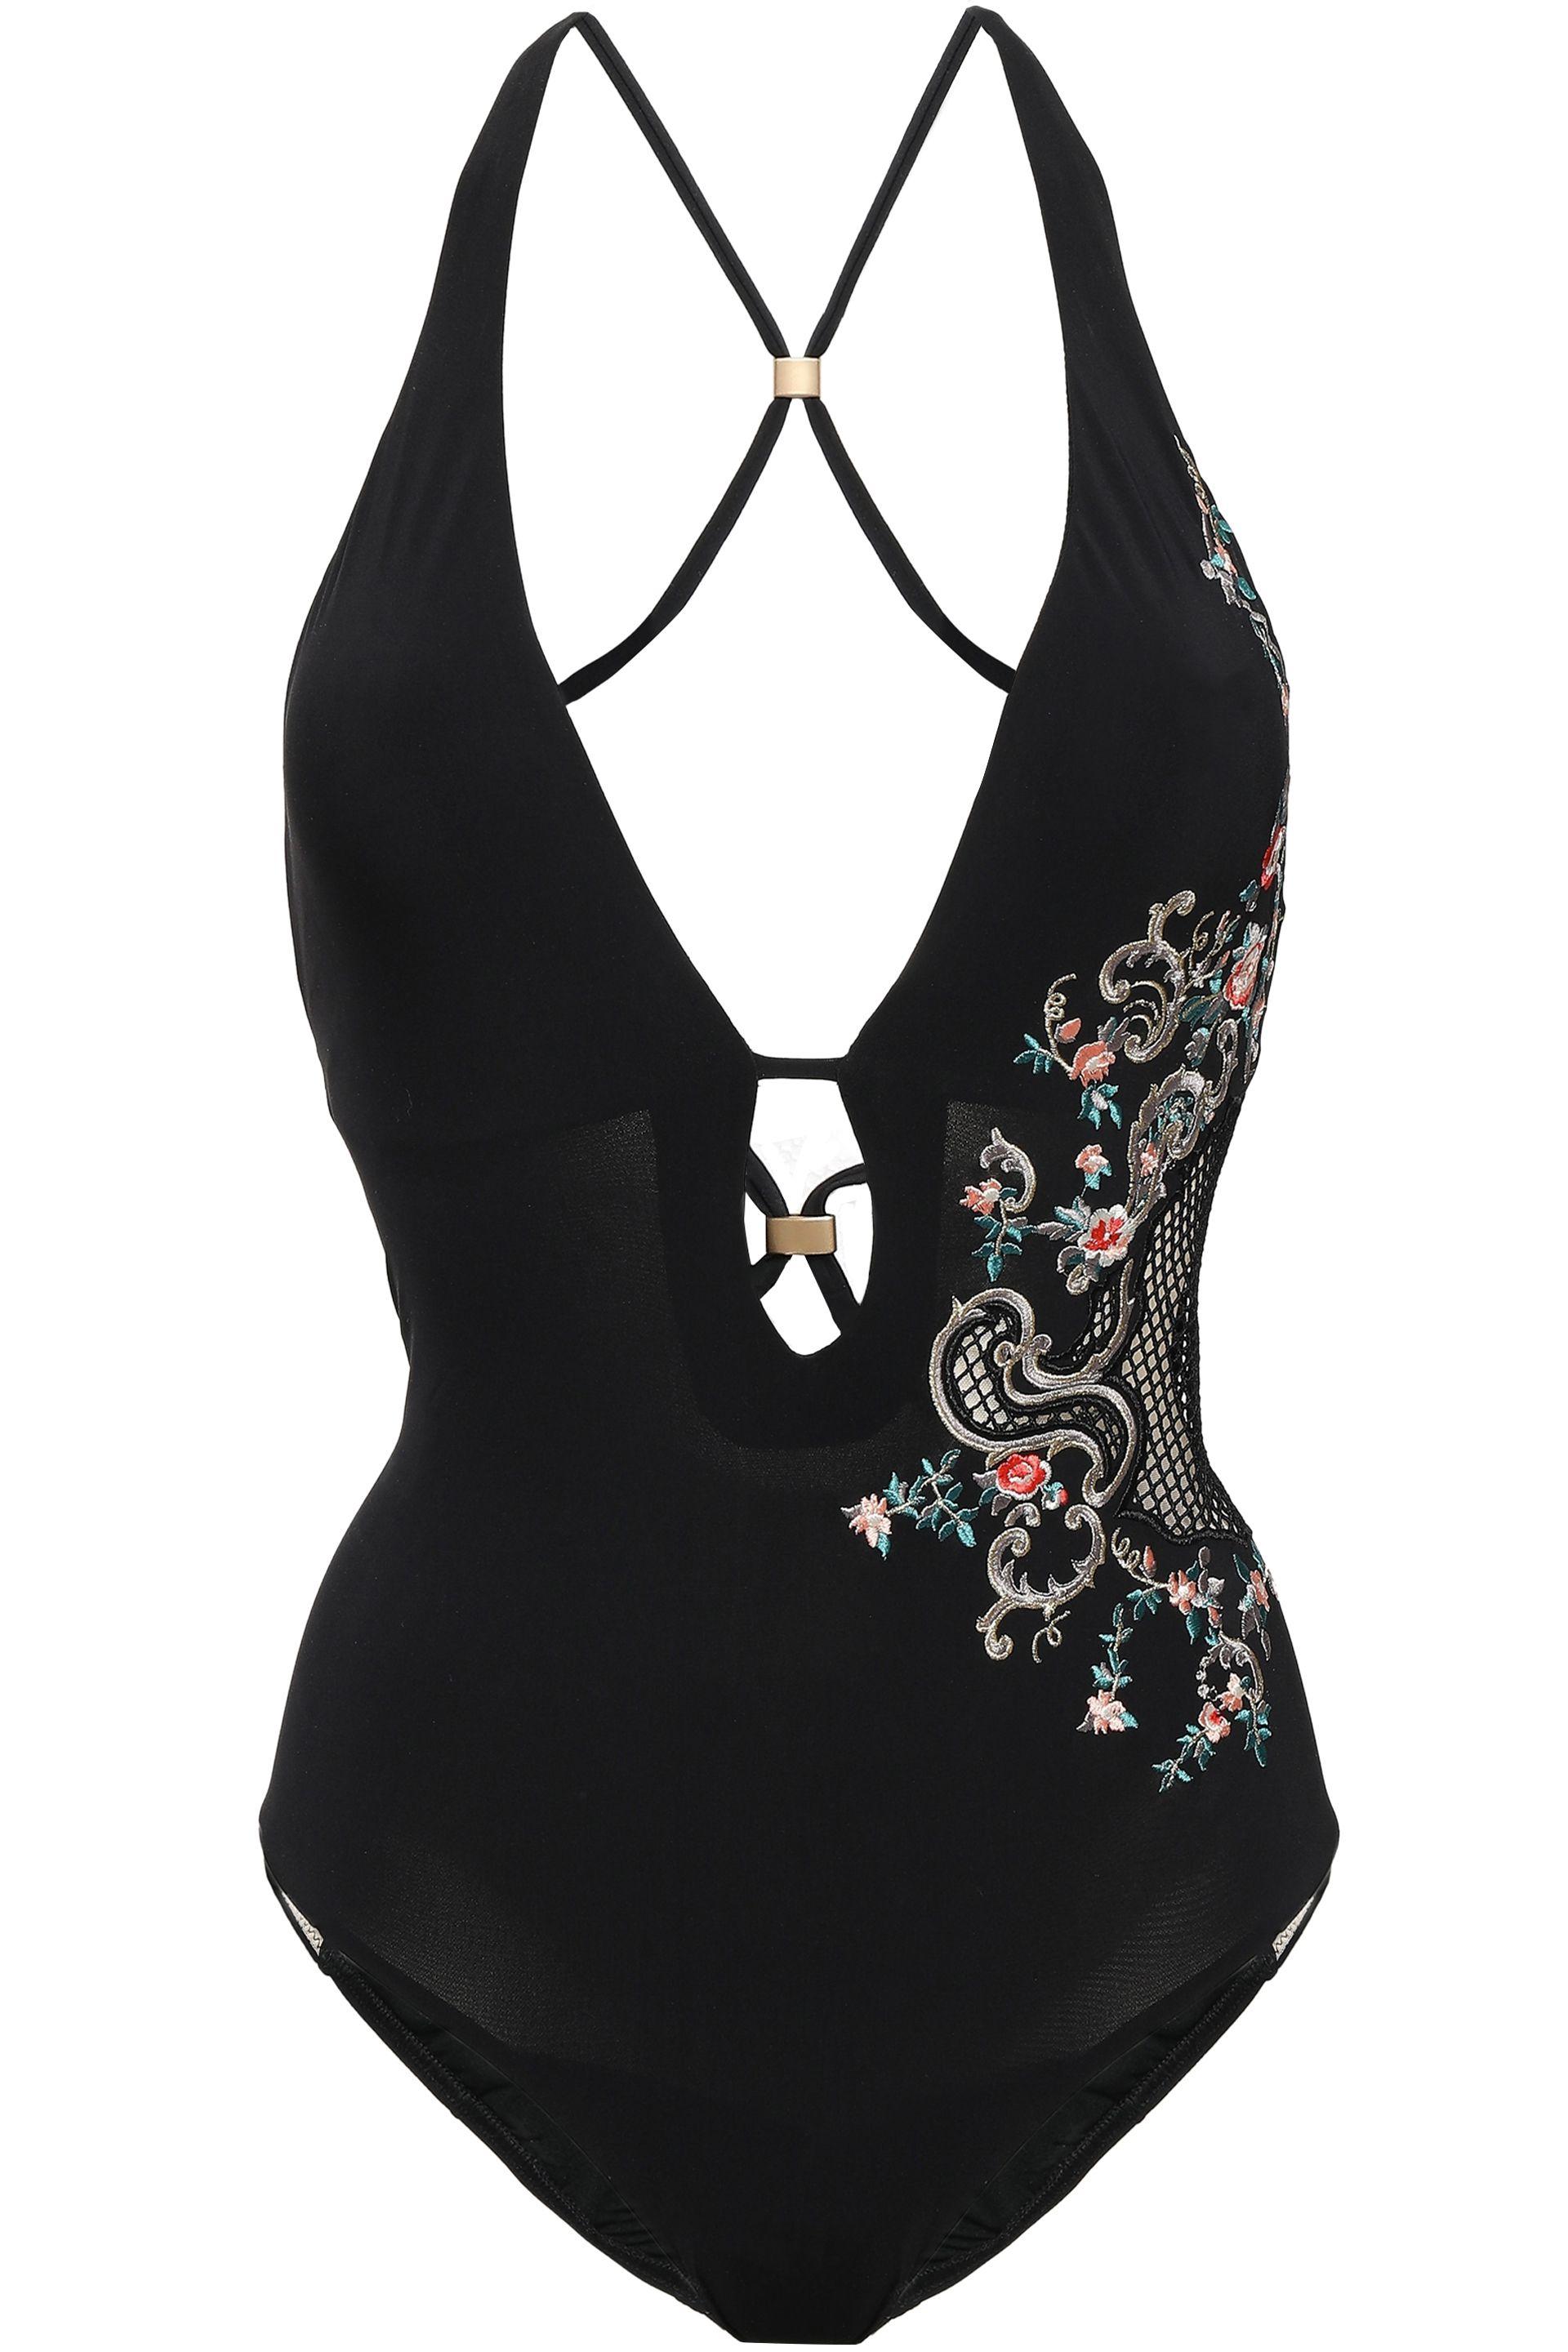 Jets by Jessika Allen Synthetic Enchantment Plunge Open-back ...